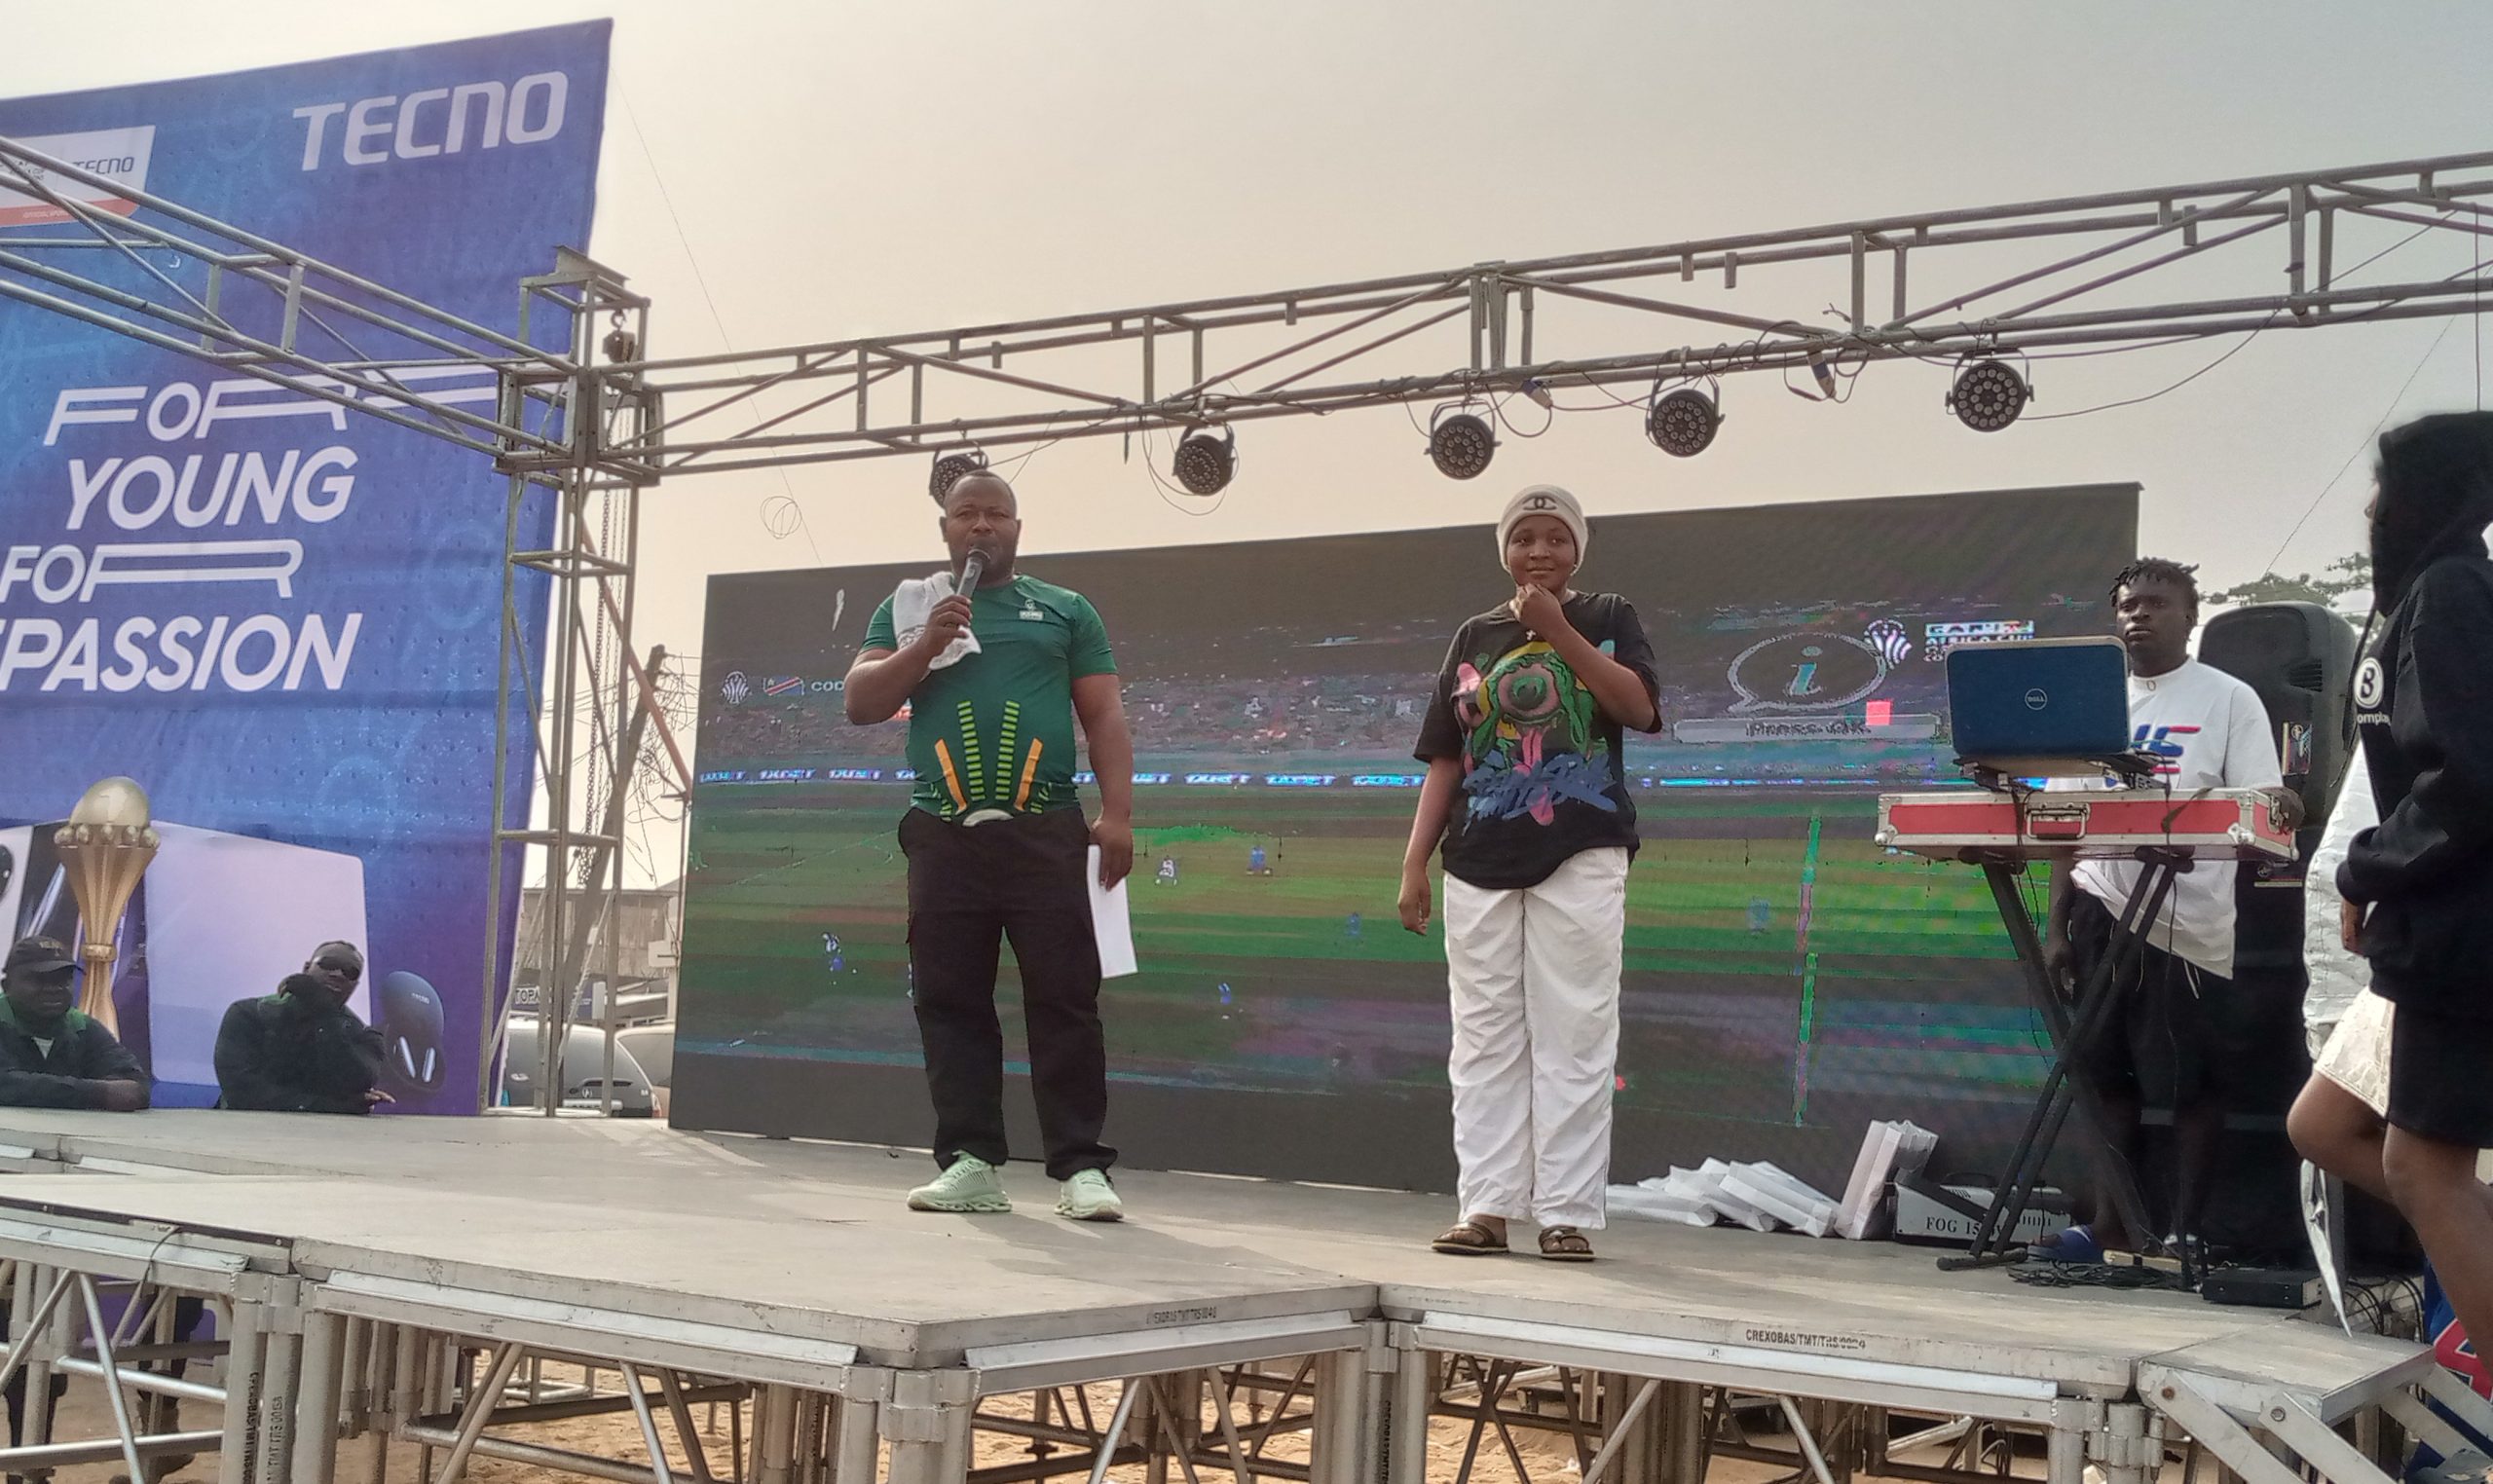 AFCON 2023 Viewing Experience Is To Promote Unity, Togetherness Among Nigerians  —Project Manager, TECNO Nigeria